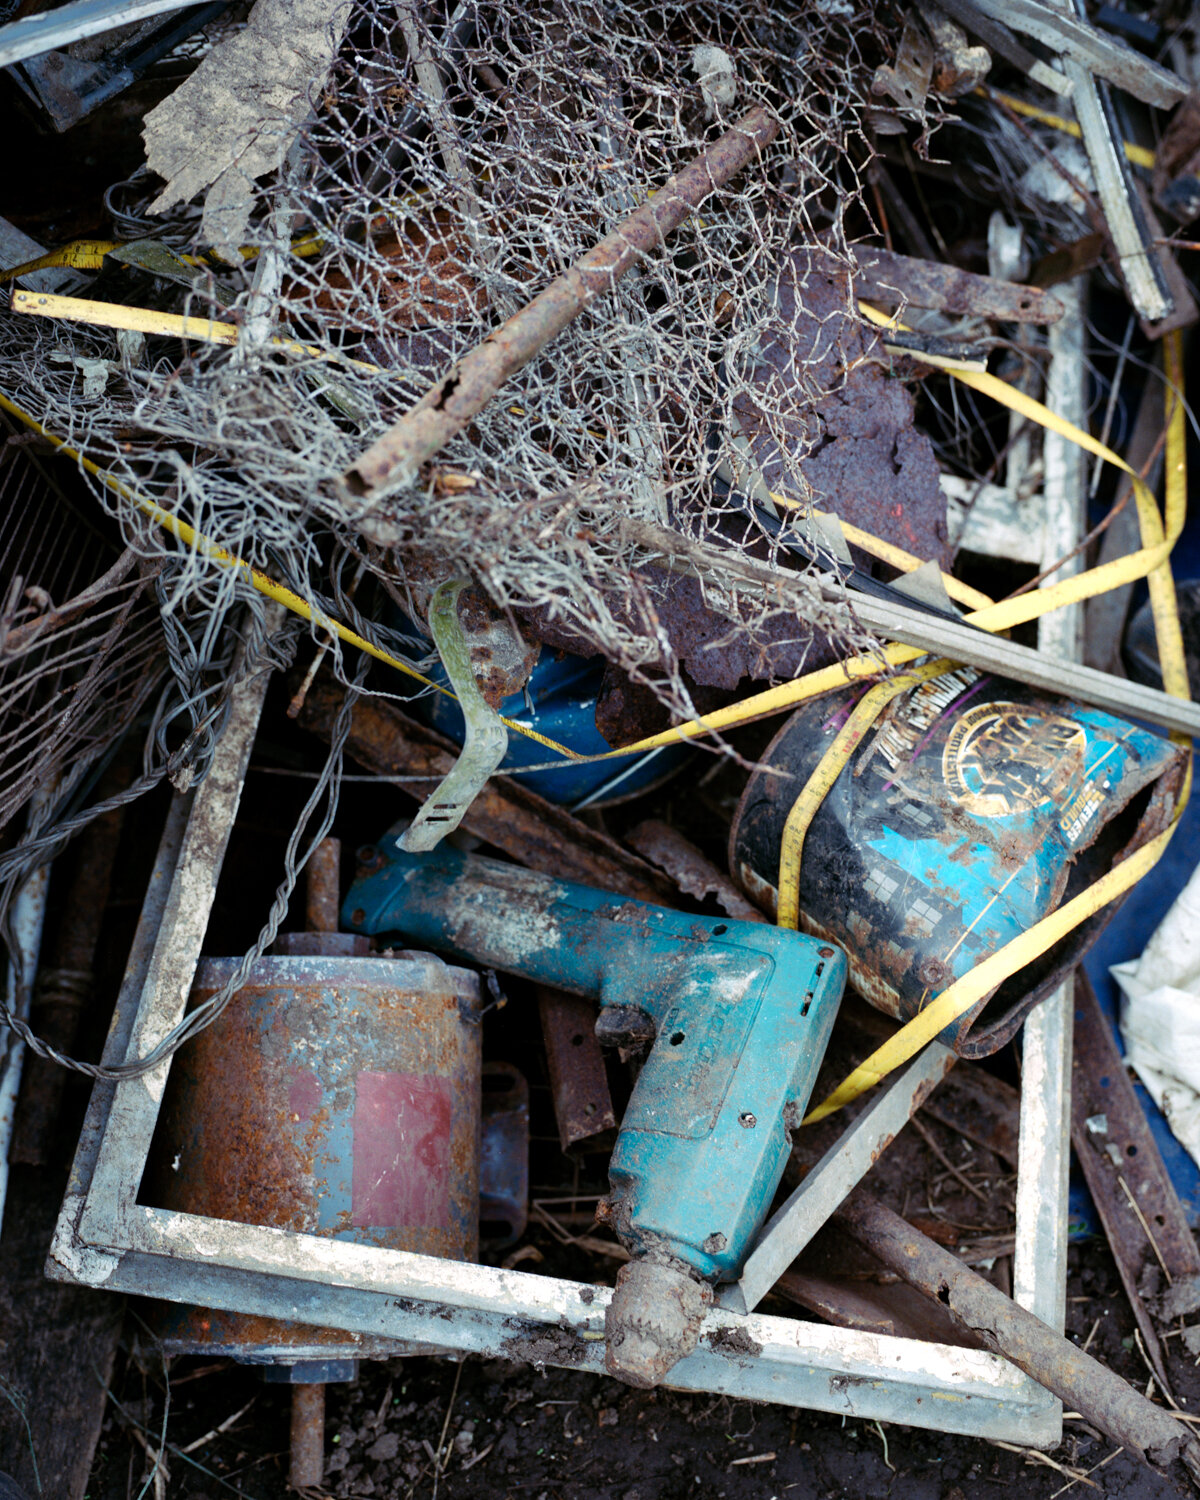 4) Scrap Metal And An Old Drill - Church Side.jpg